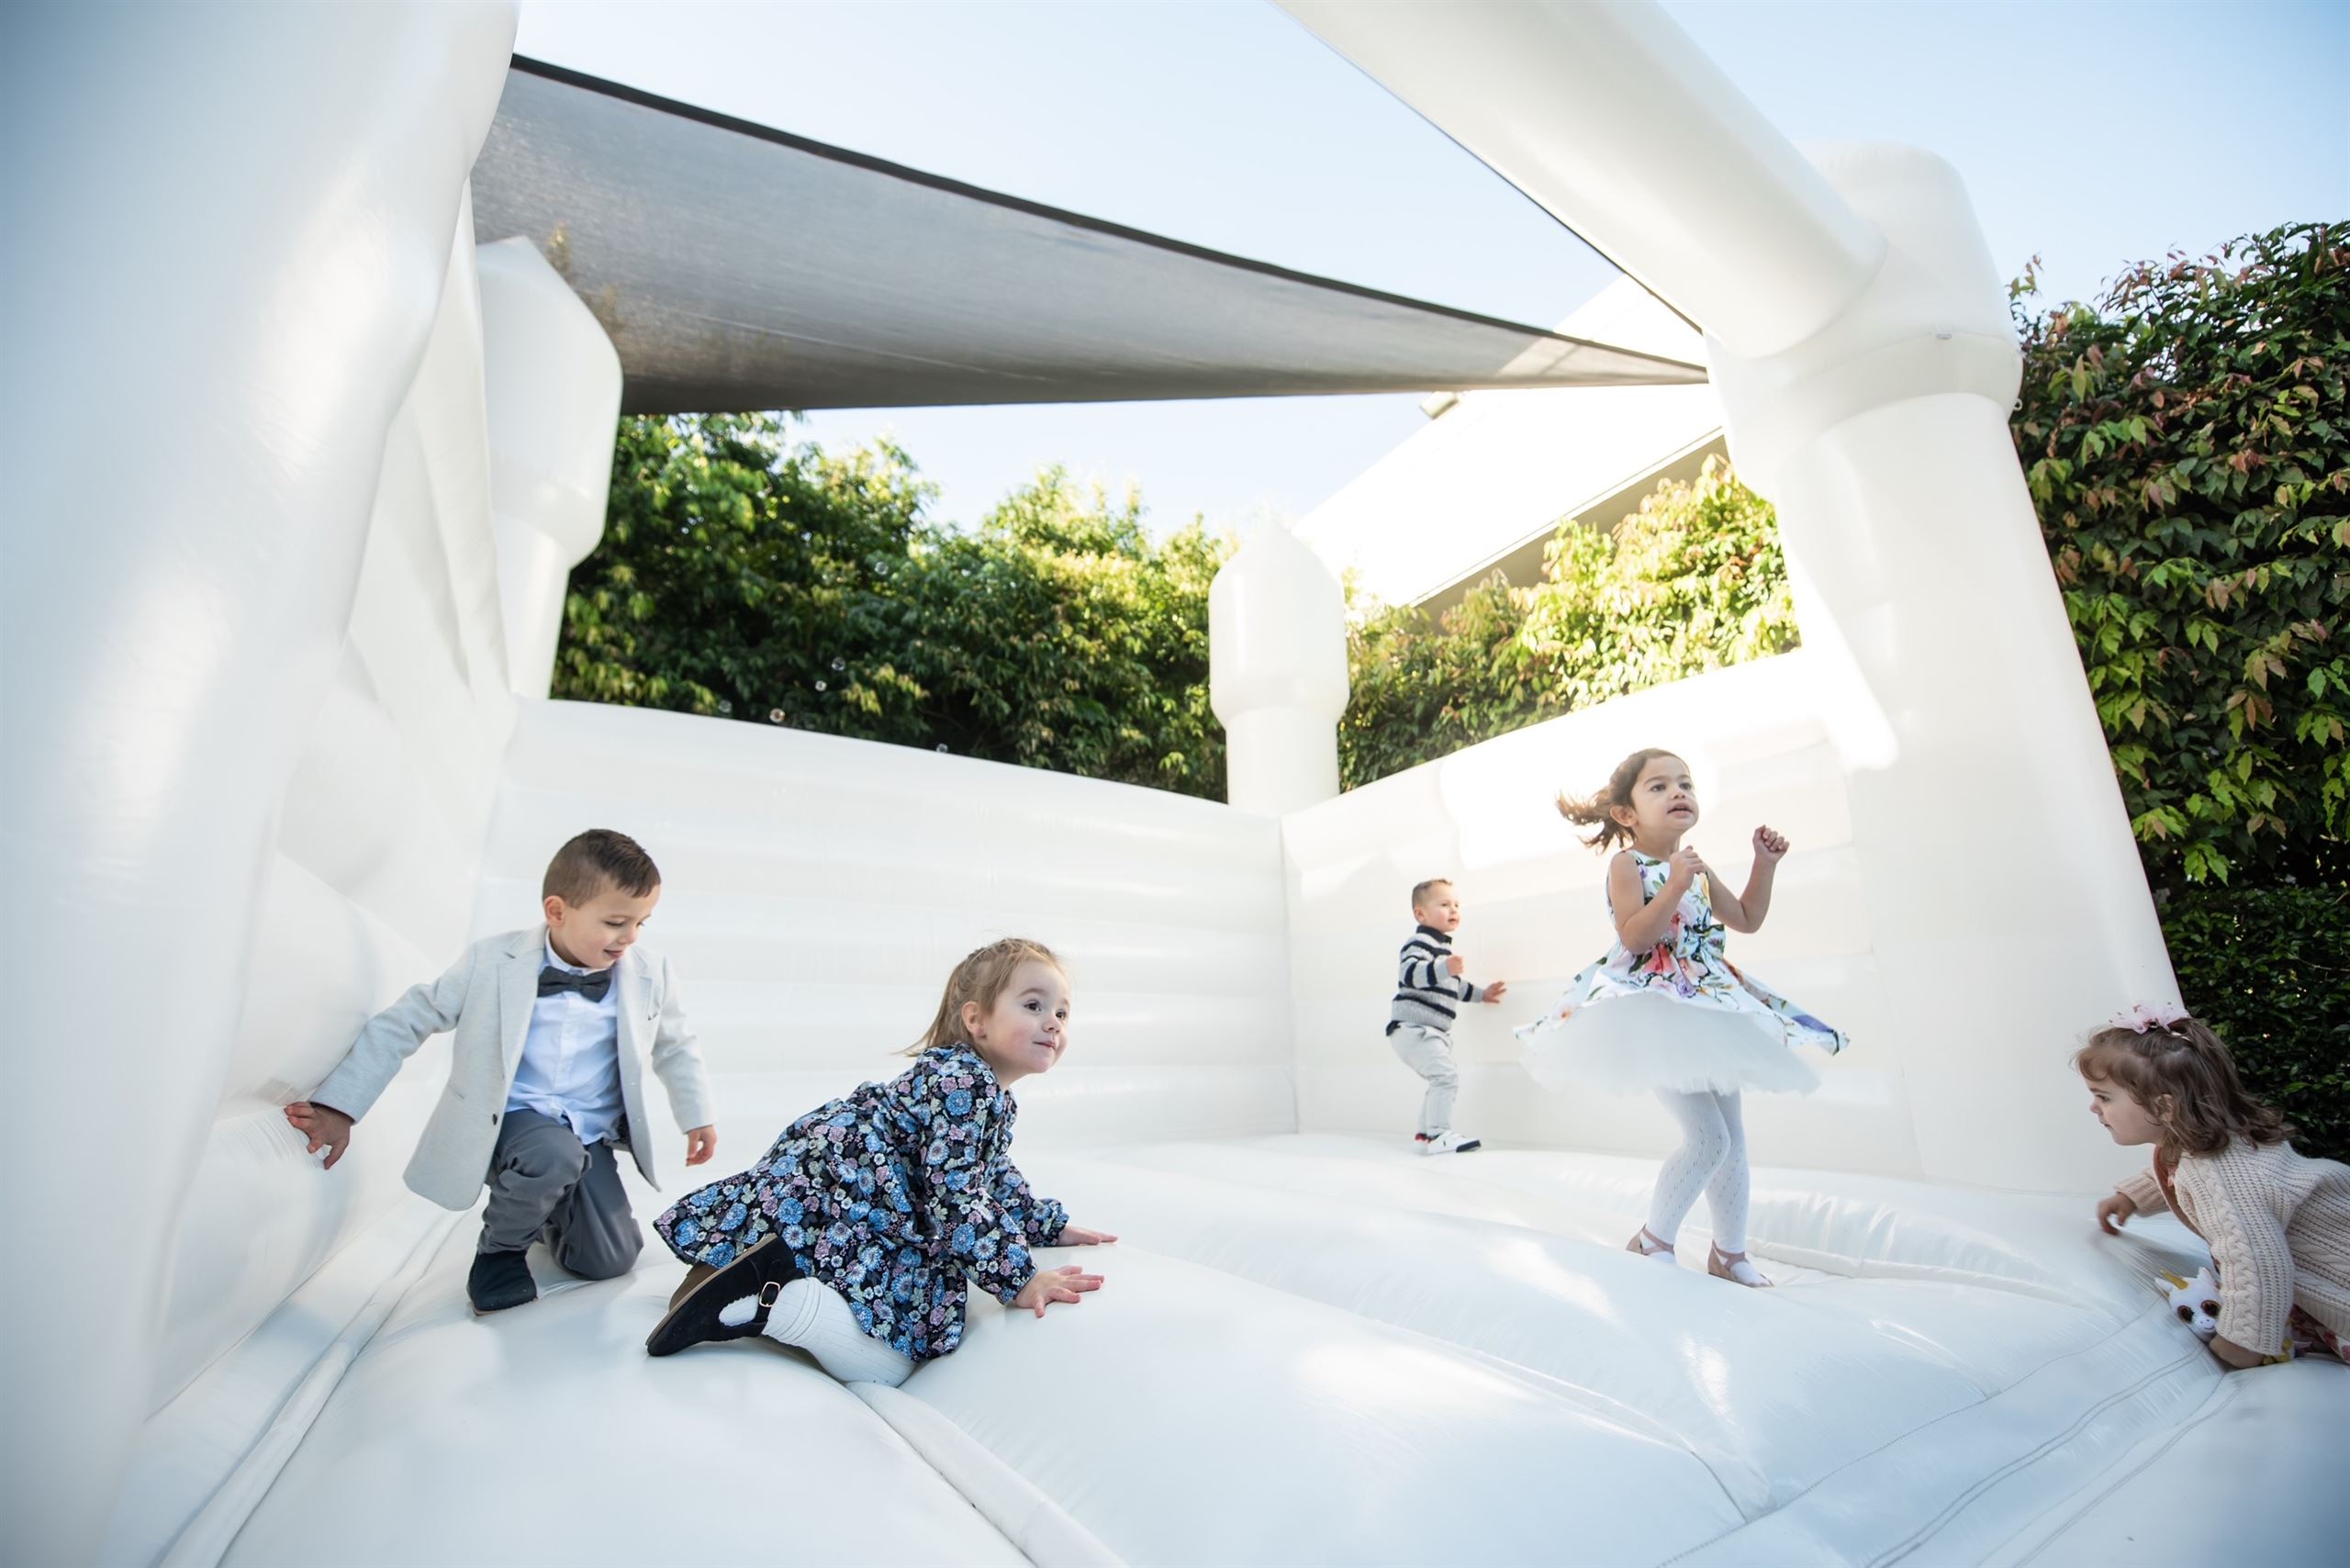 Children playing on an inflatable bouncy castle at a Christening venue in Melbourne, jumping with joy.